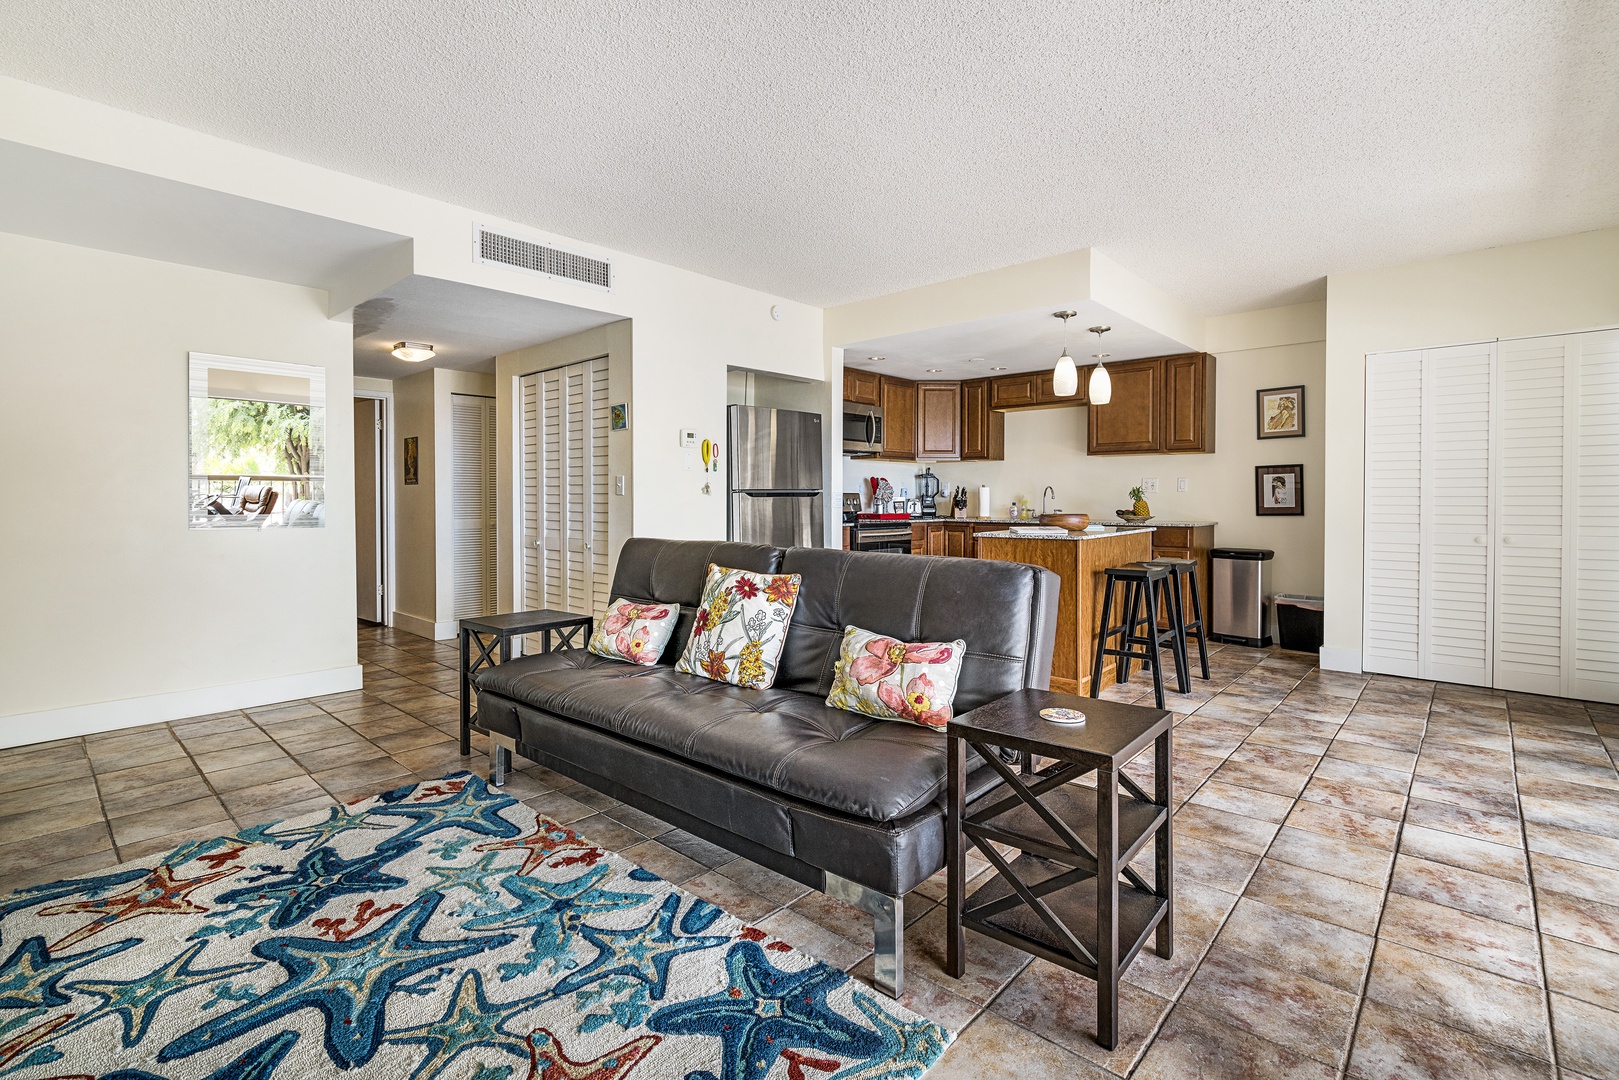 Kailua Kona Vacation Rentals, Kona Plaza 201 - Open floor plan for your entire group to spread out